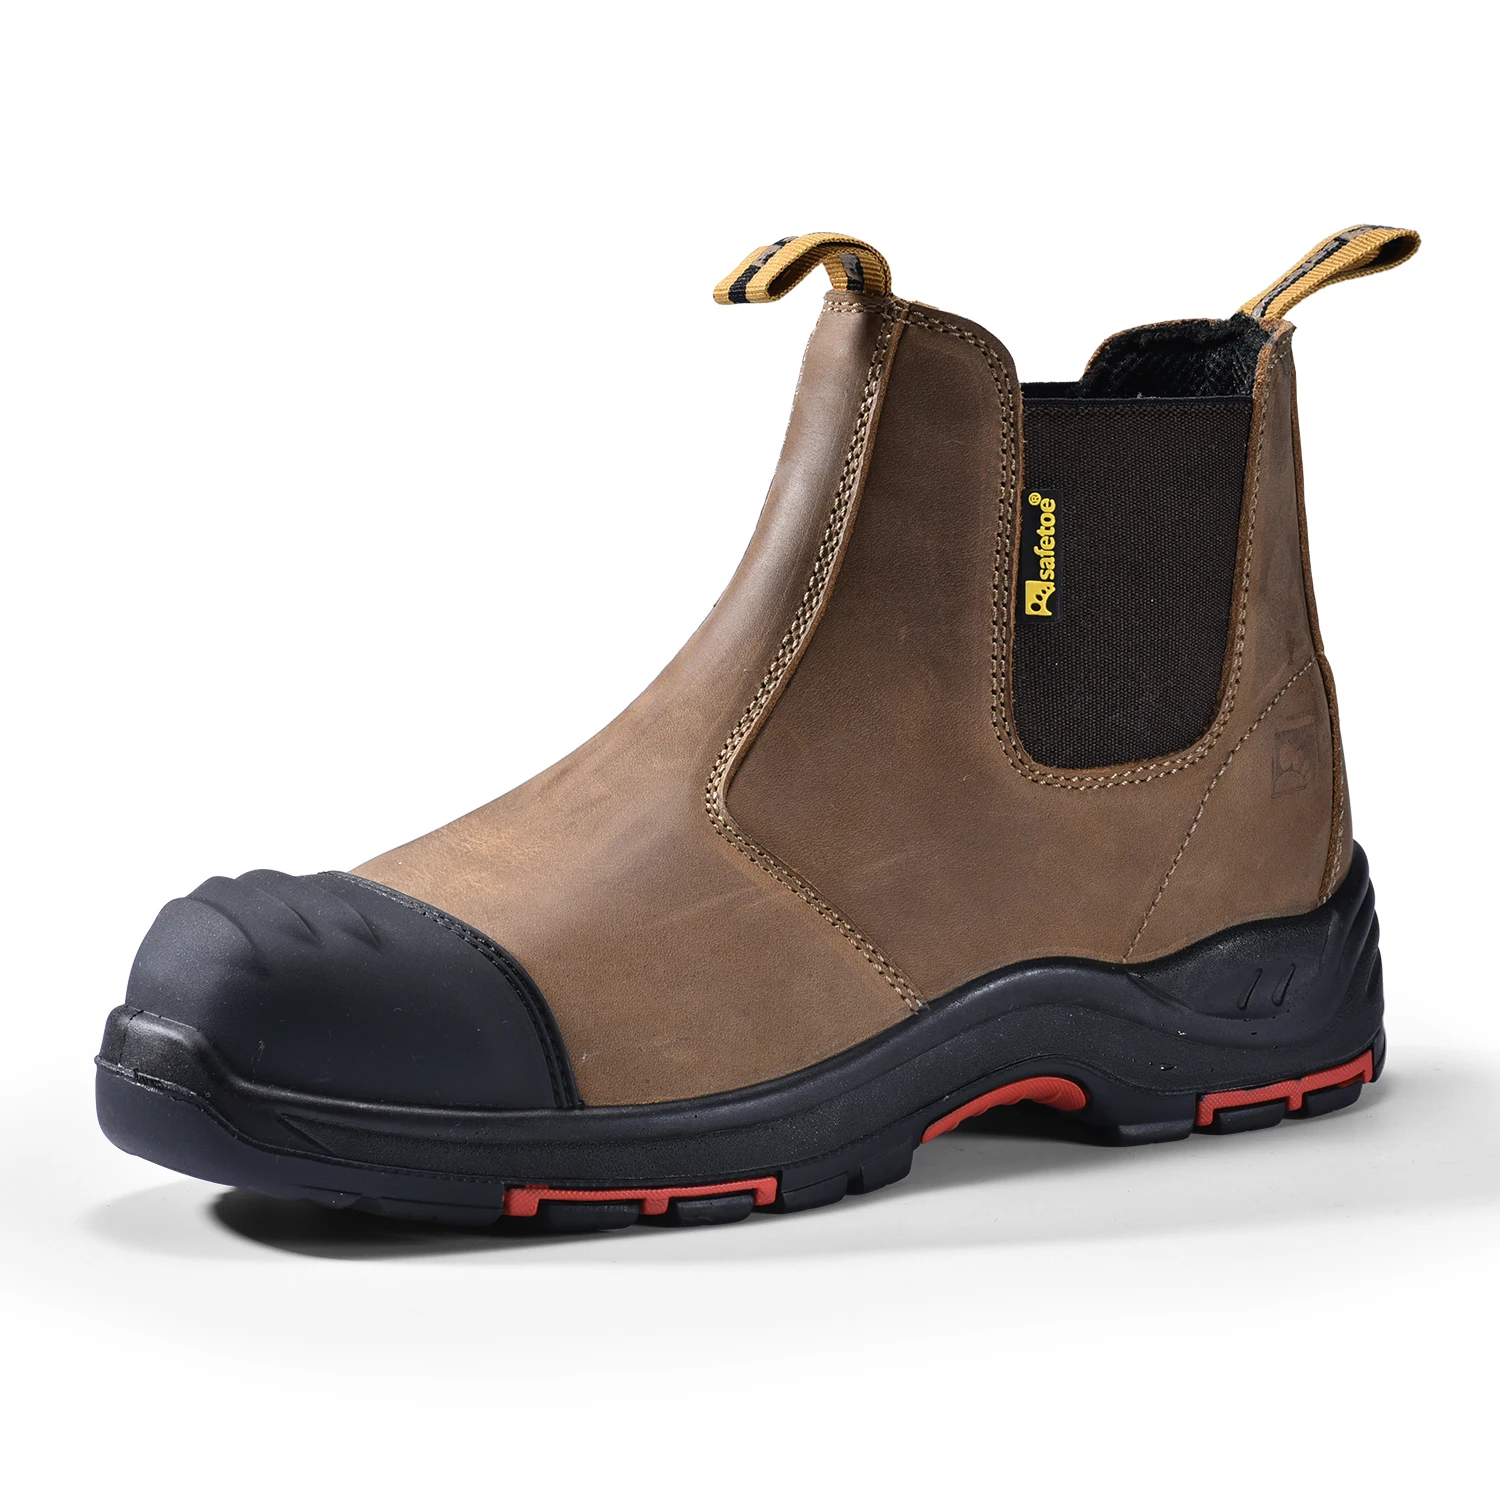 8025 Free Sock Slip On Site Steel Toe Cap Mens Work Boots Shoes Dealer Boots SAFETOE Water Resistant Safety Boots CE Quality Certified